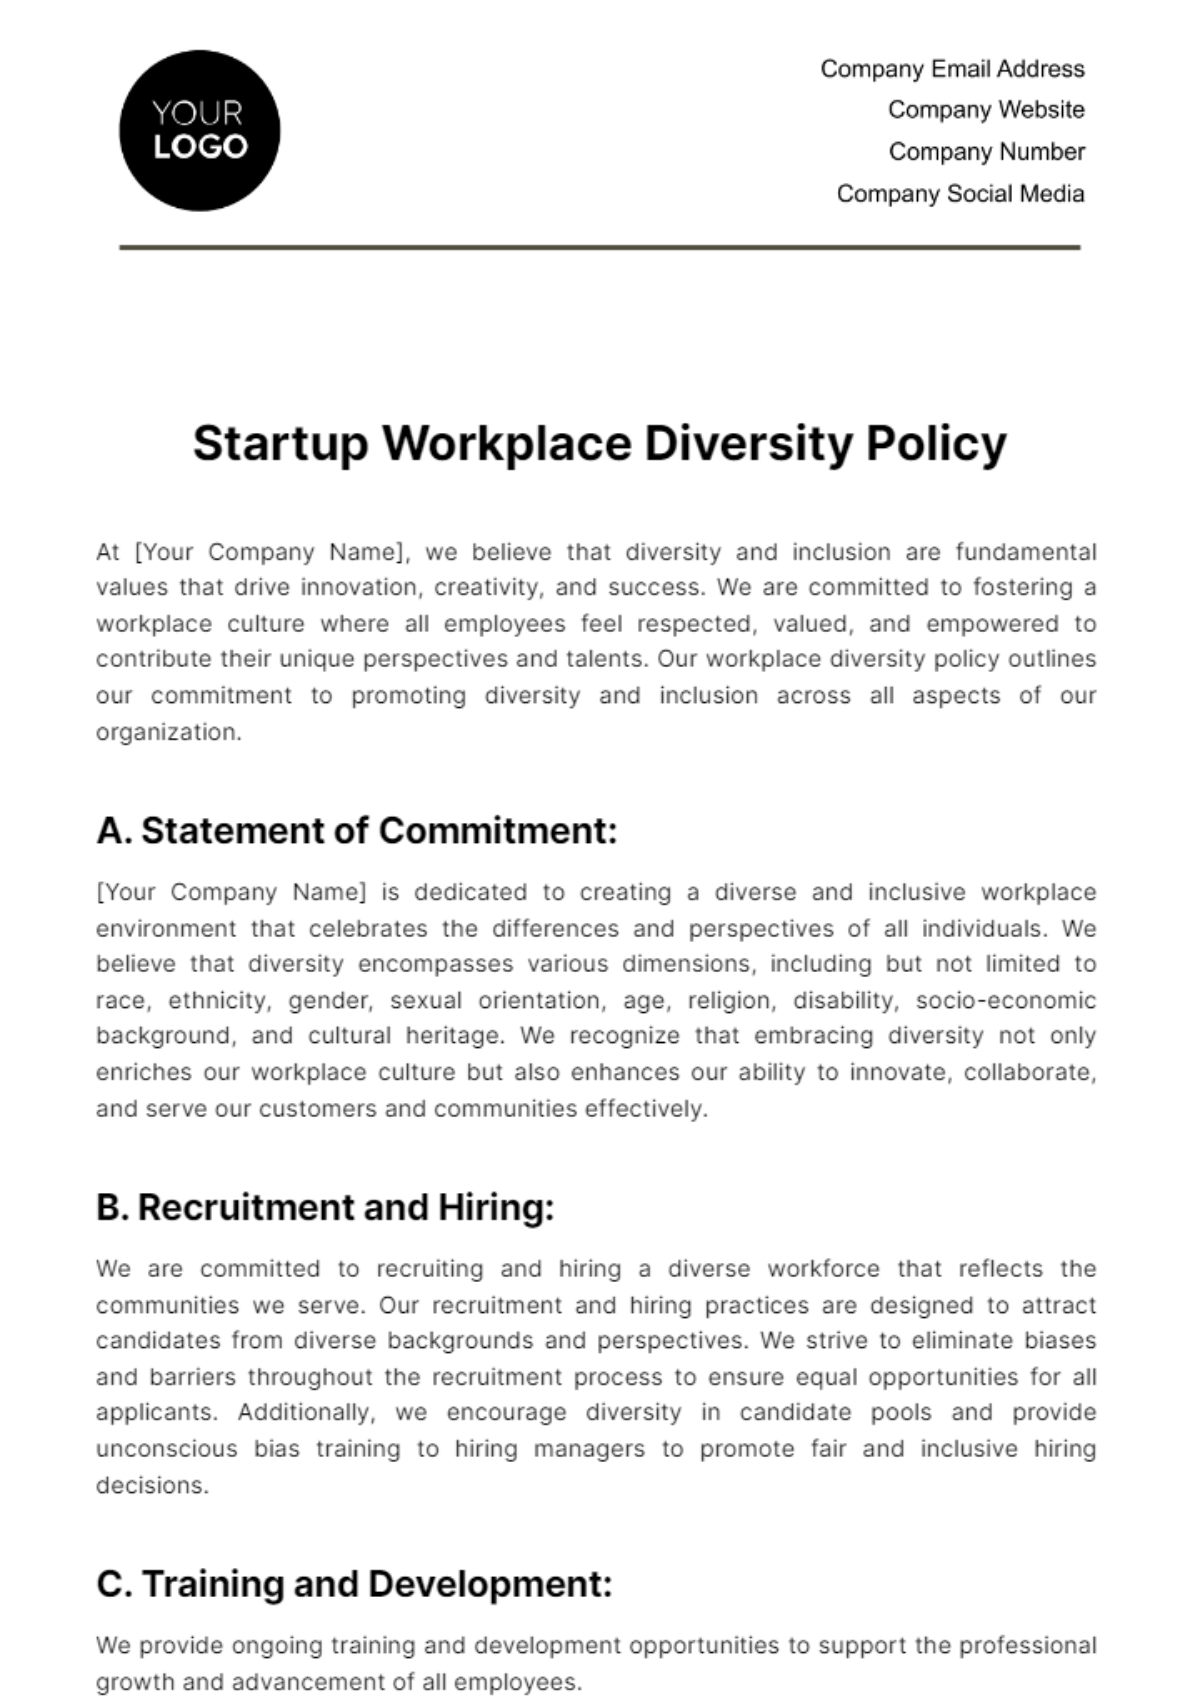 Free Startup Workplace Diversity Policy Template